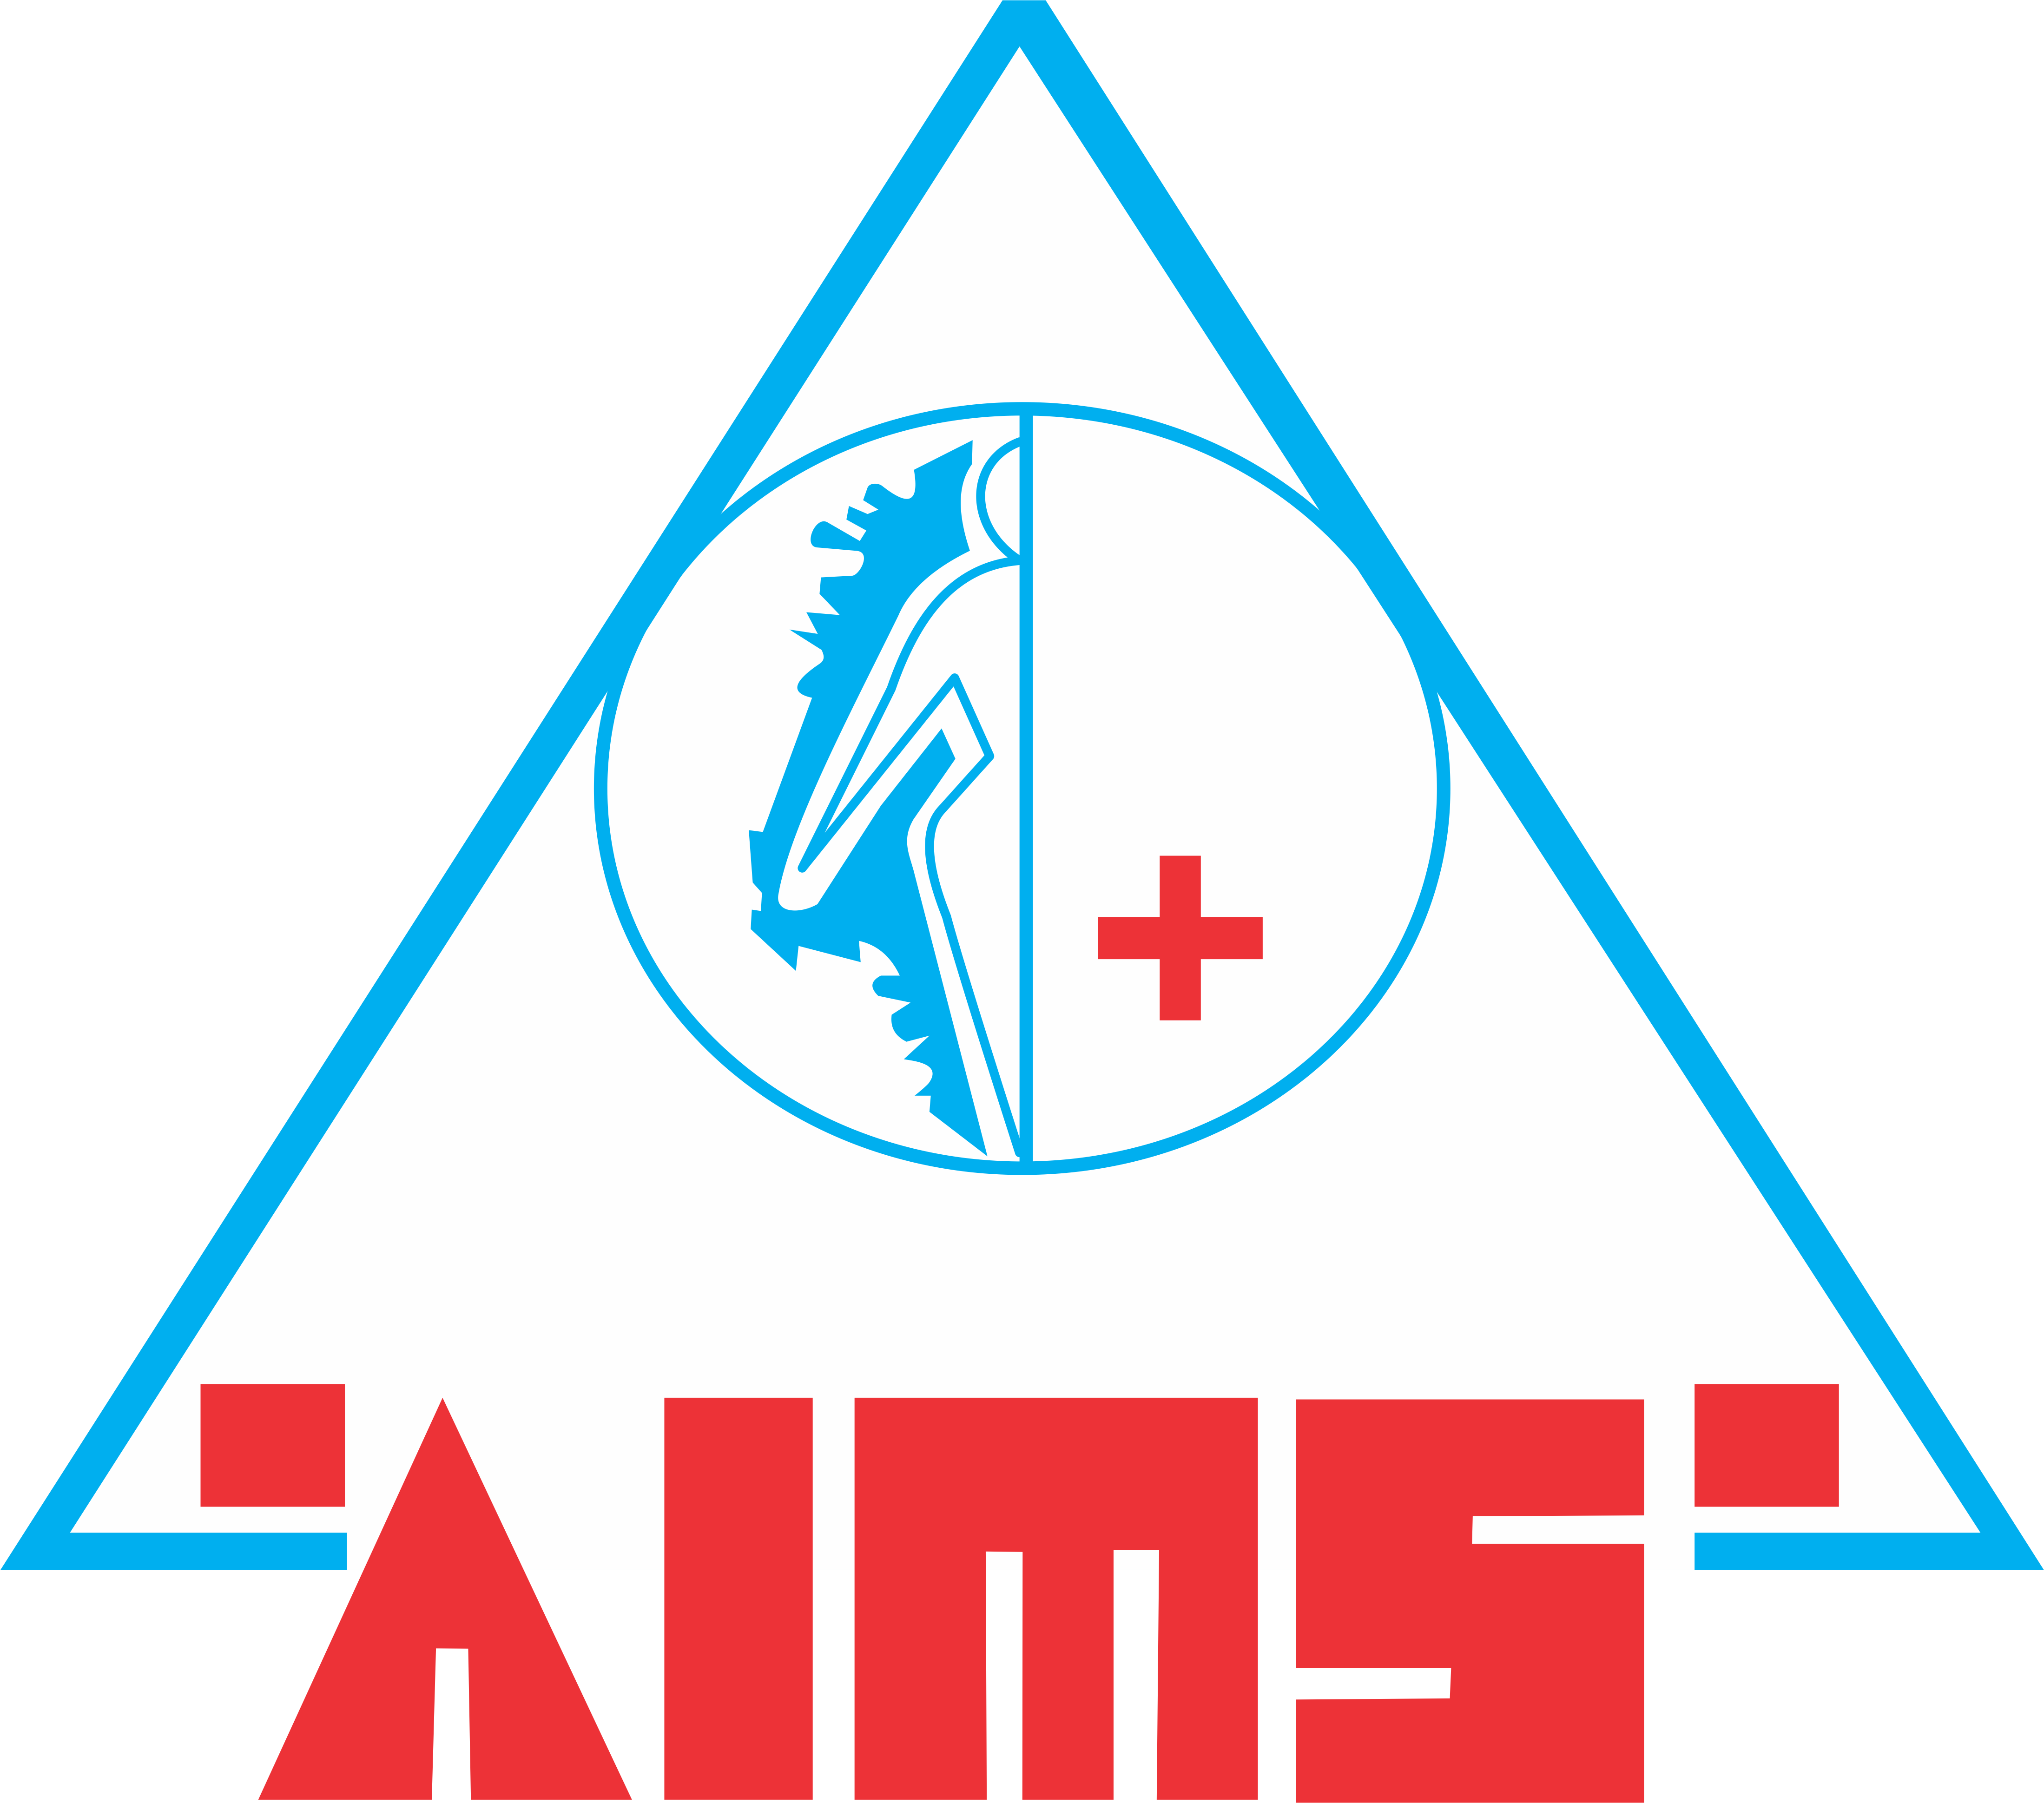 Anant Multispeciality Hospital|Diagnostic centre|Medical Services